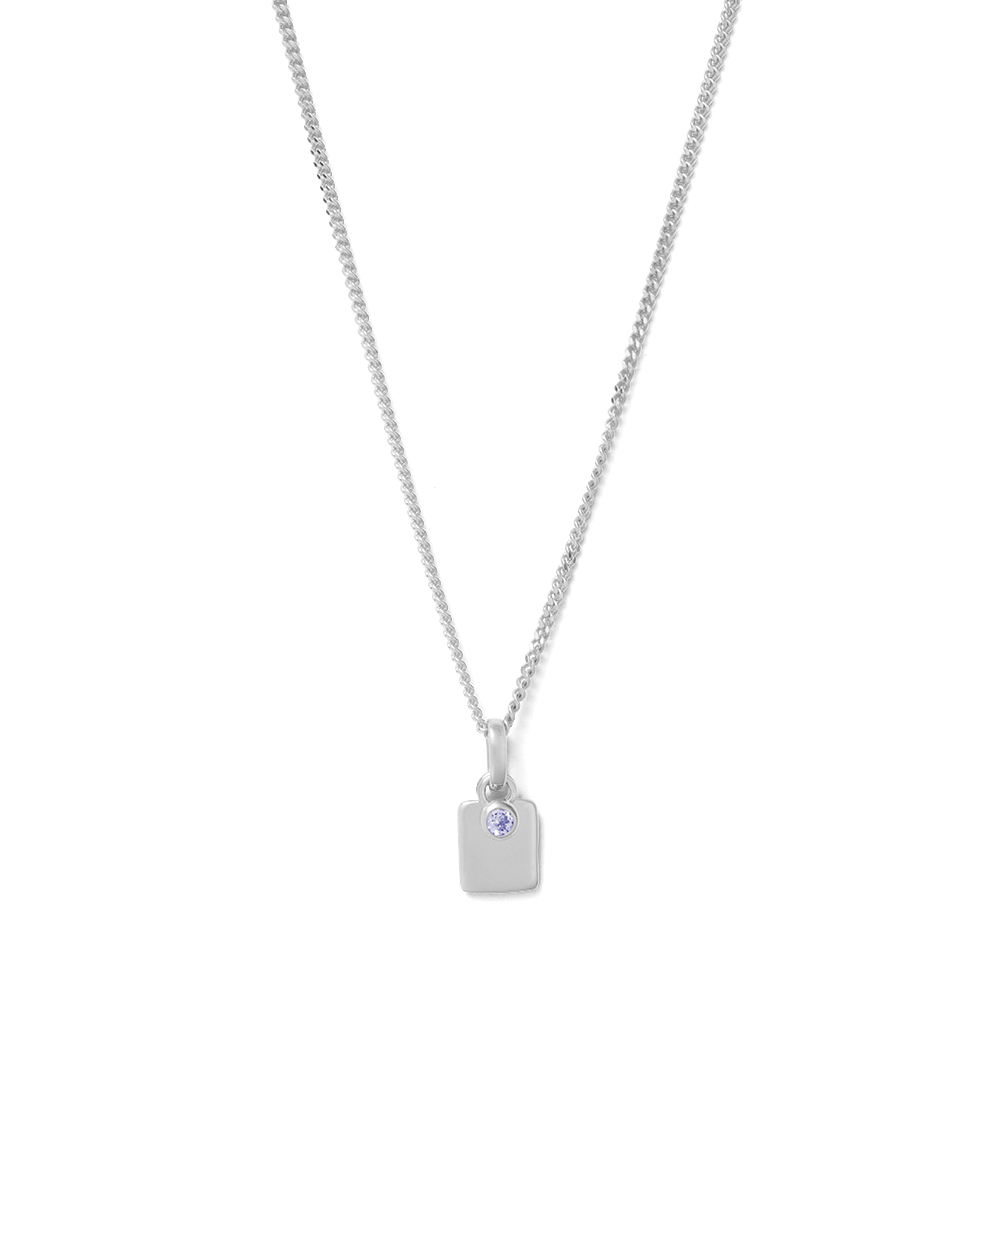 ENGRAVABLE BIRTHSTONE NECKLACE (STERLING SILVER)